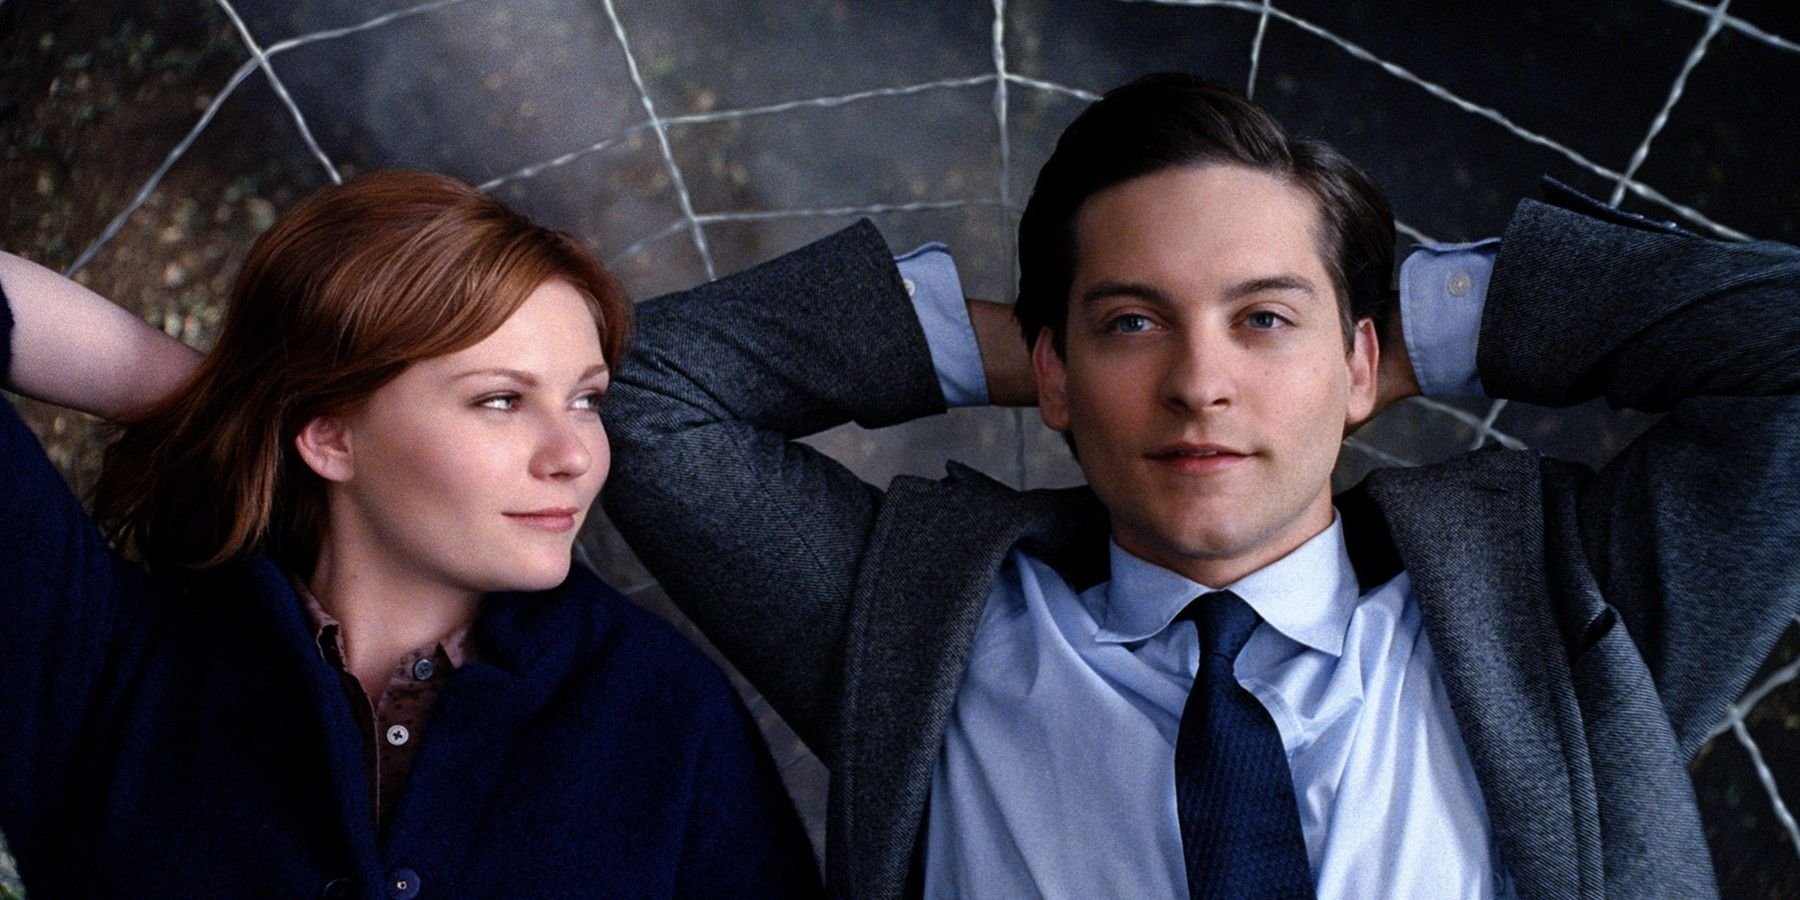 Kirsten-Dunst-and-Tobey-Maguire-in-Spider-Man-3.jpeg